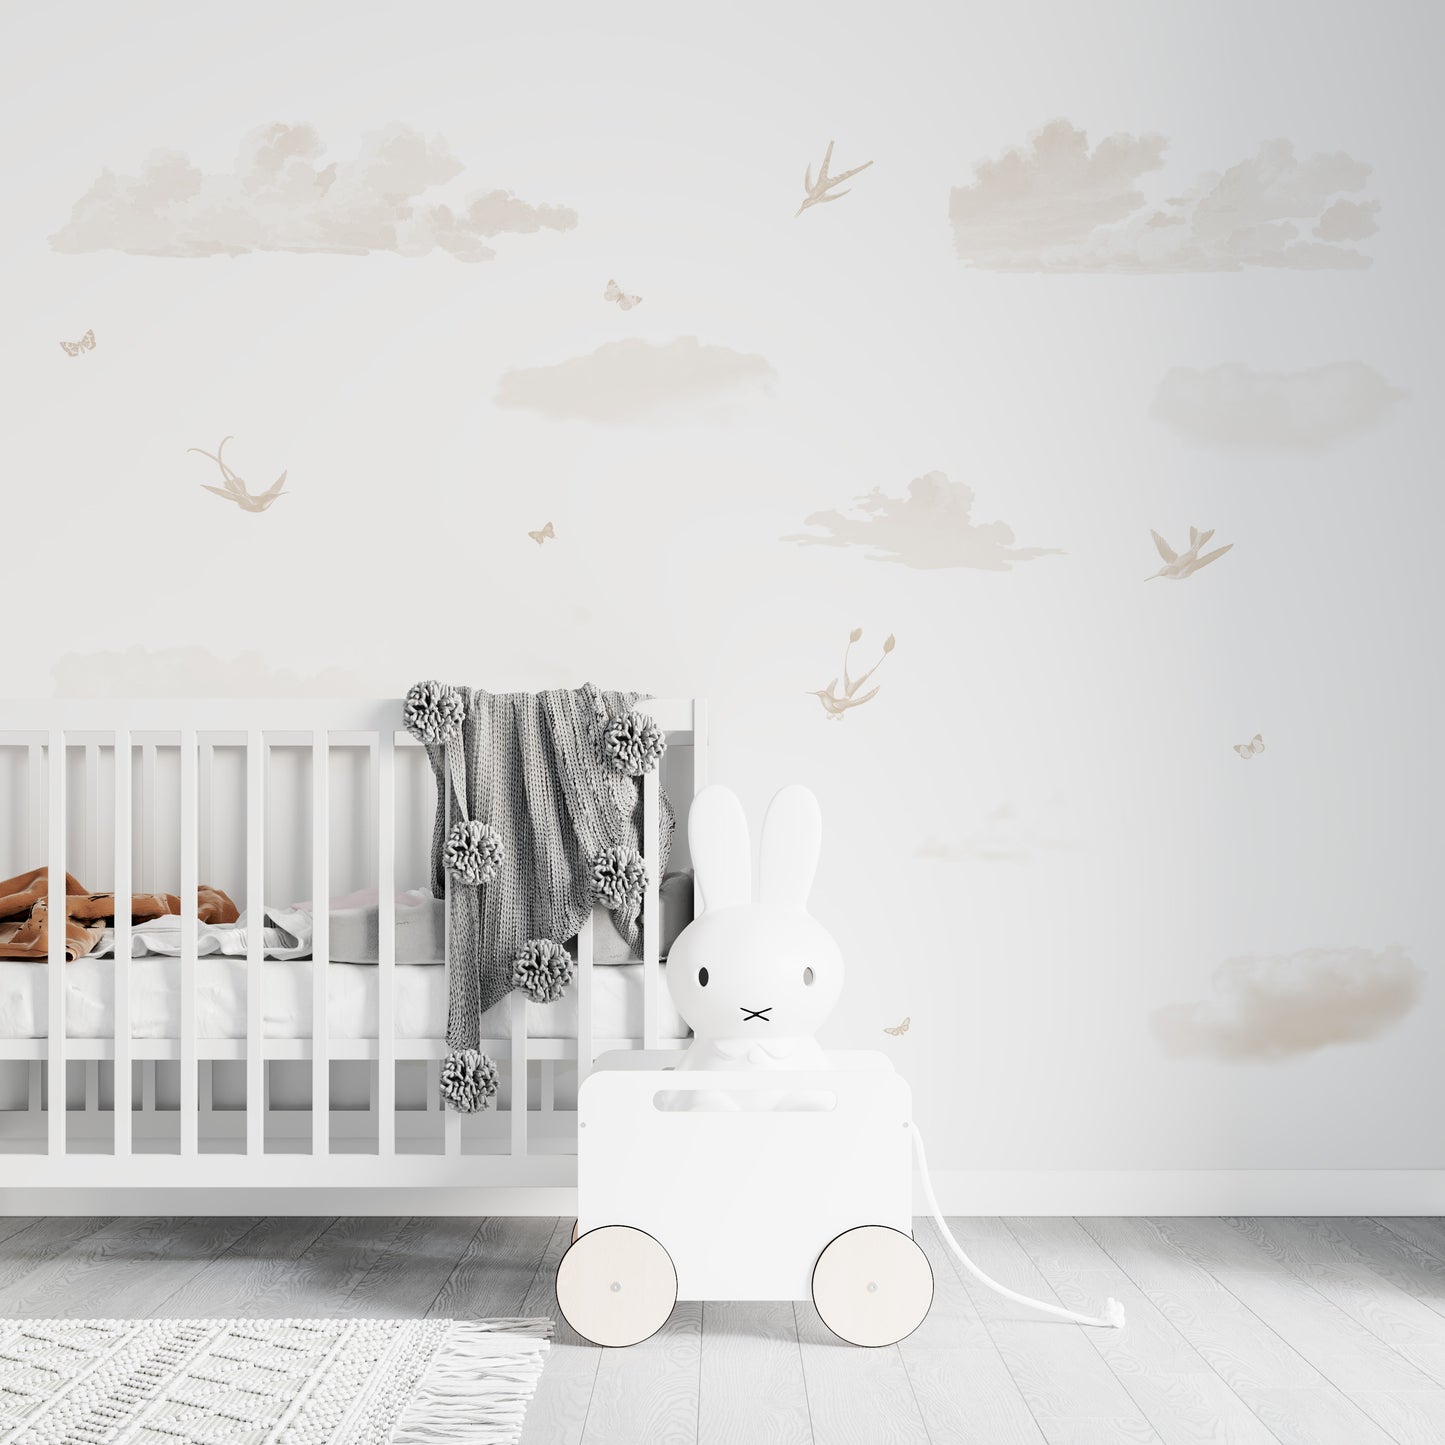 Cloud Wall Stickers  Nursery Decor Easy to Apply  Decals for Bedrooms for  Girls Boys  Nursery Wall Art White Clouds 25pcs  Amazonin Baby  Products